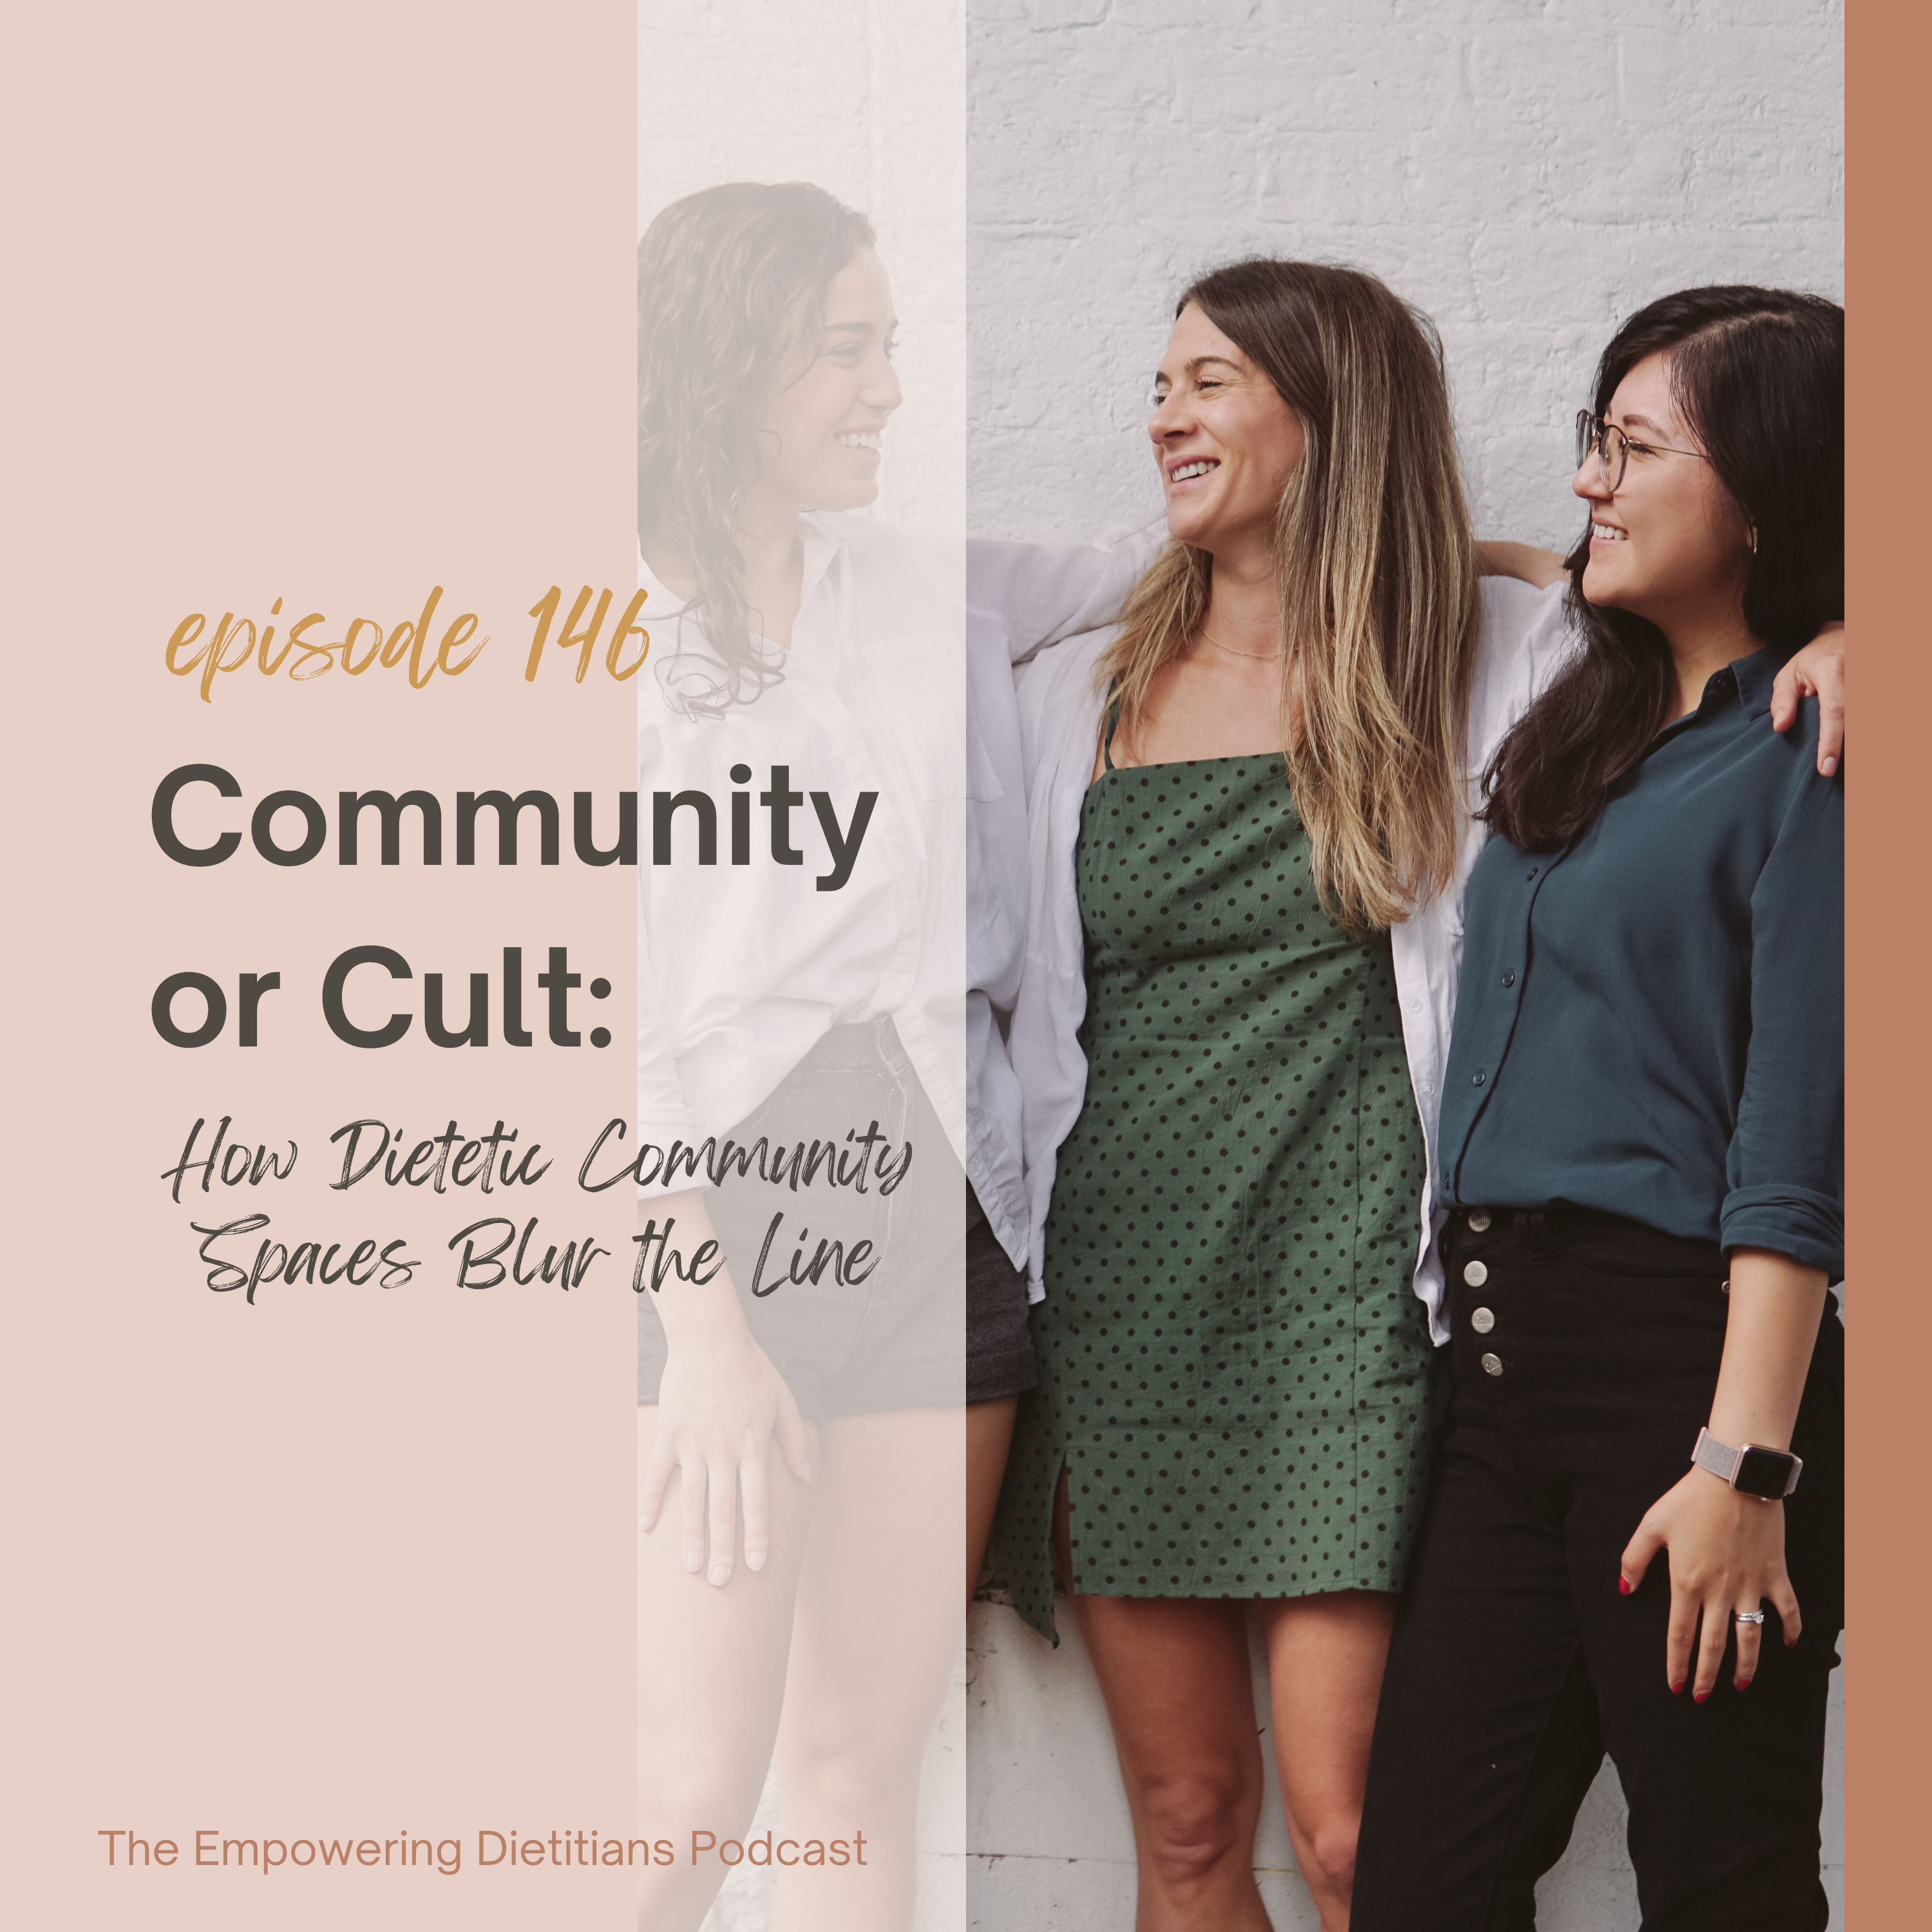 Community or Cult: How Dietetic Community Spaces Blur the Line